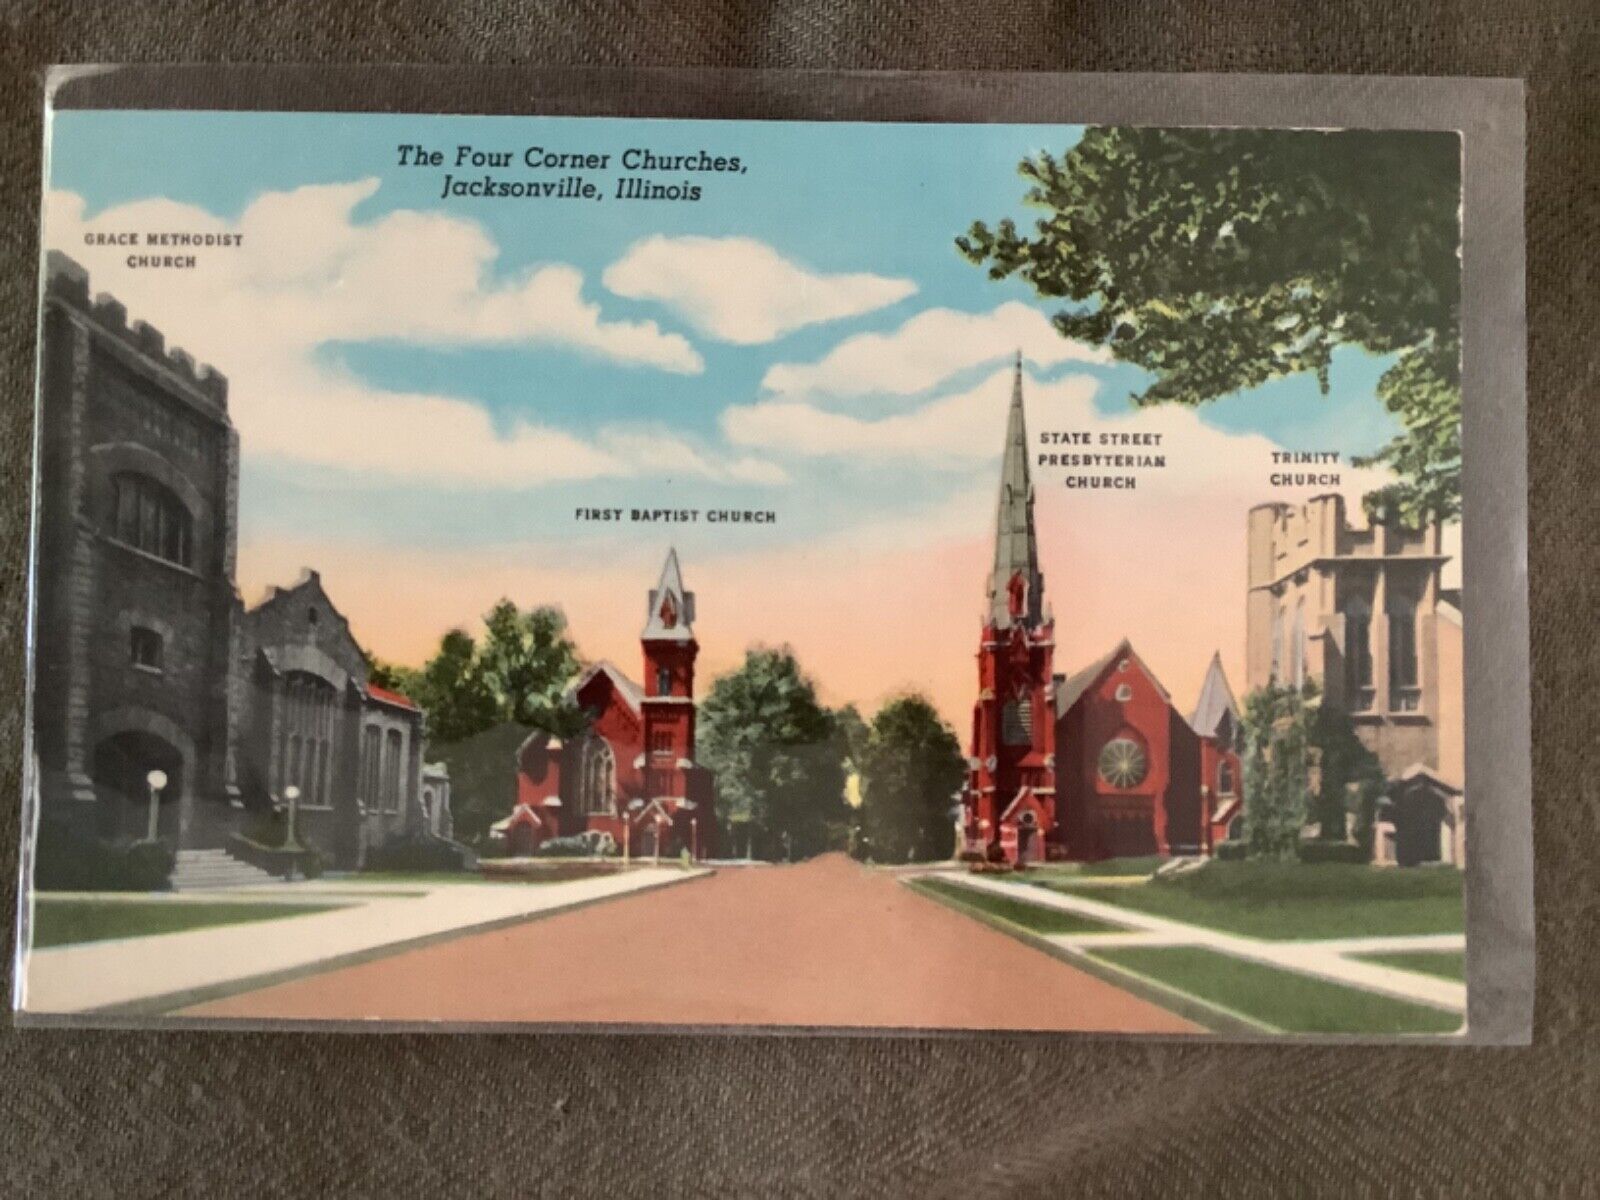 Post Card, The Four Corner Churches of Jacksonville, ill.